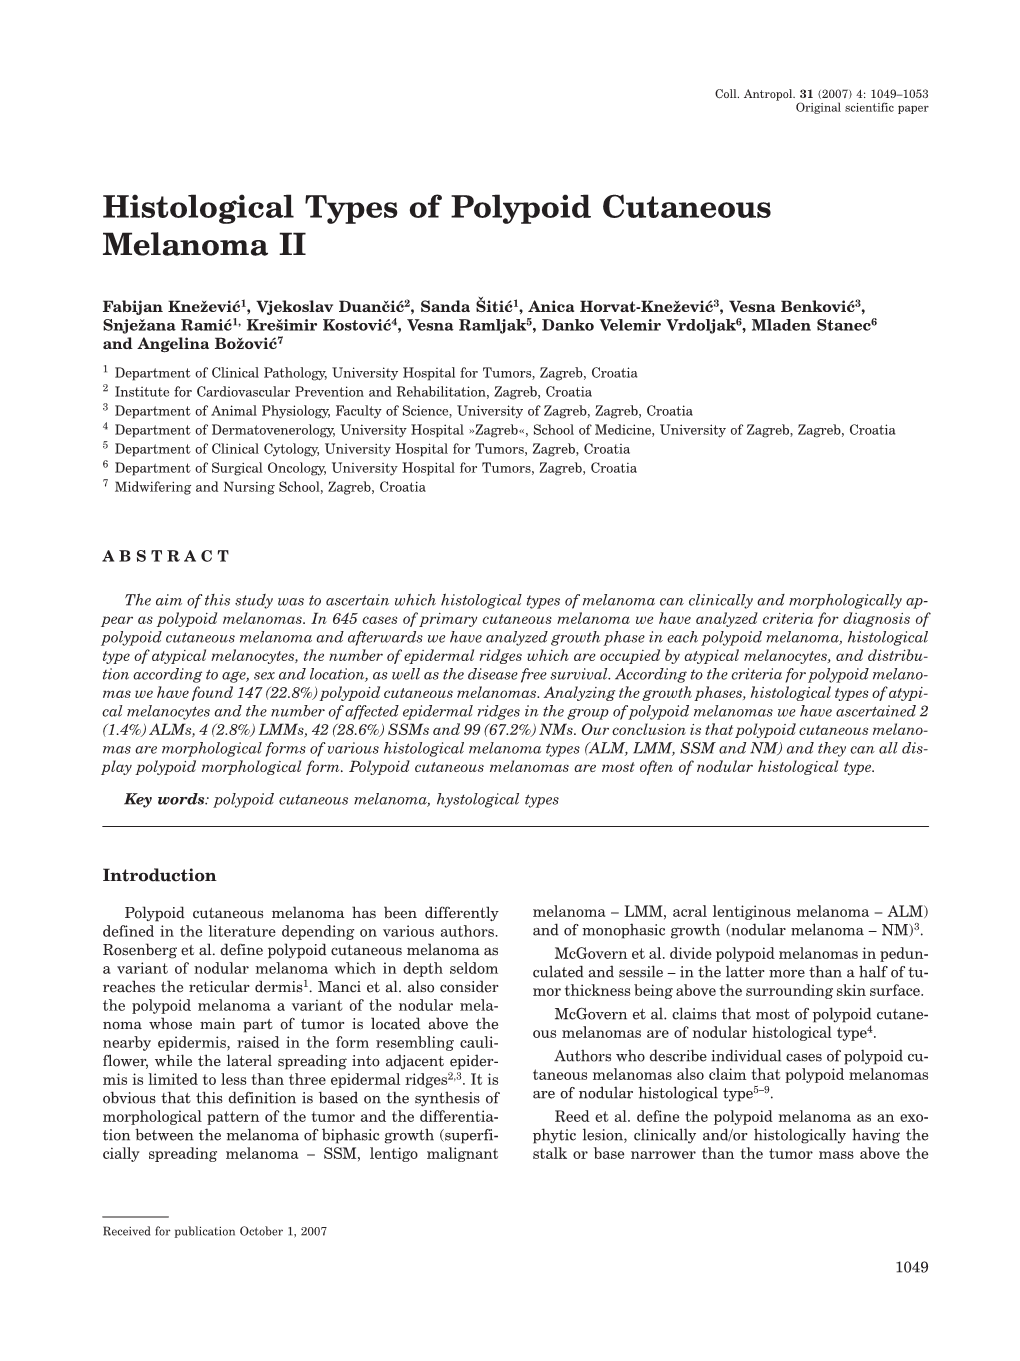 Histological Types of Polypoid Cutaneous Melanoma II